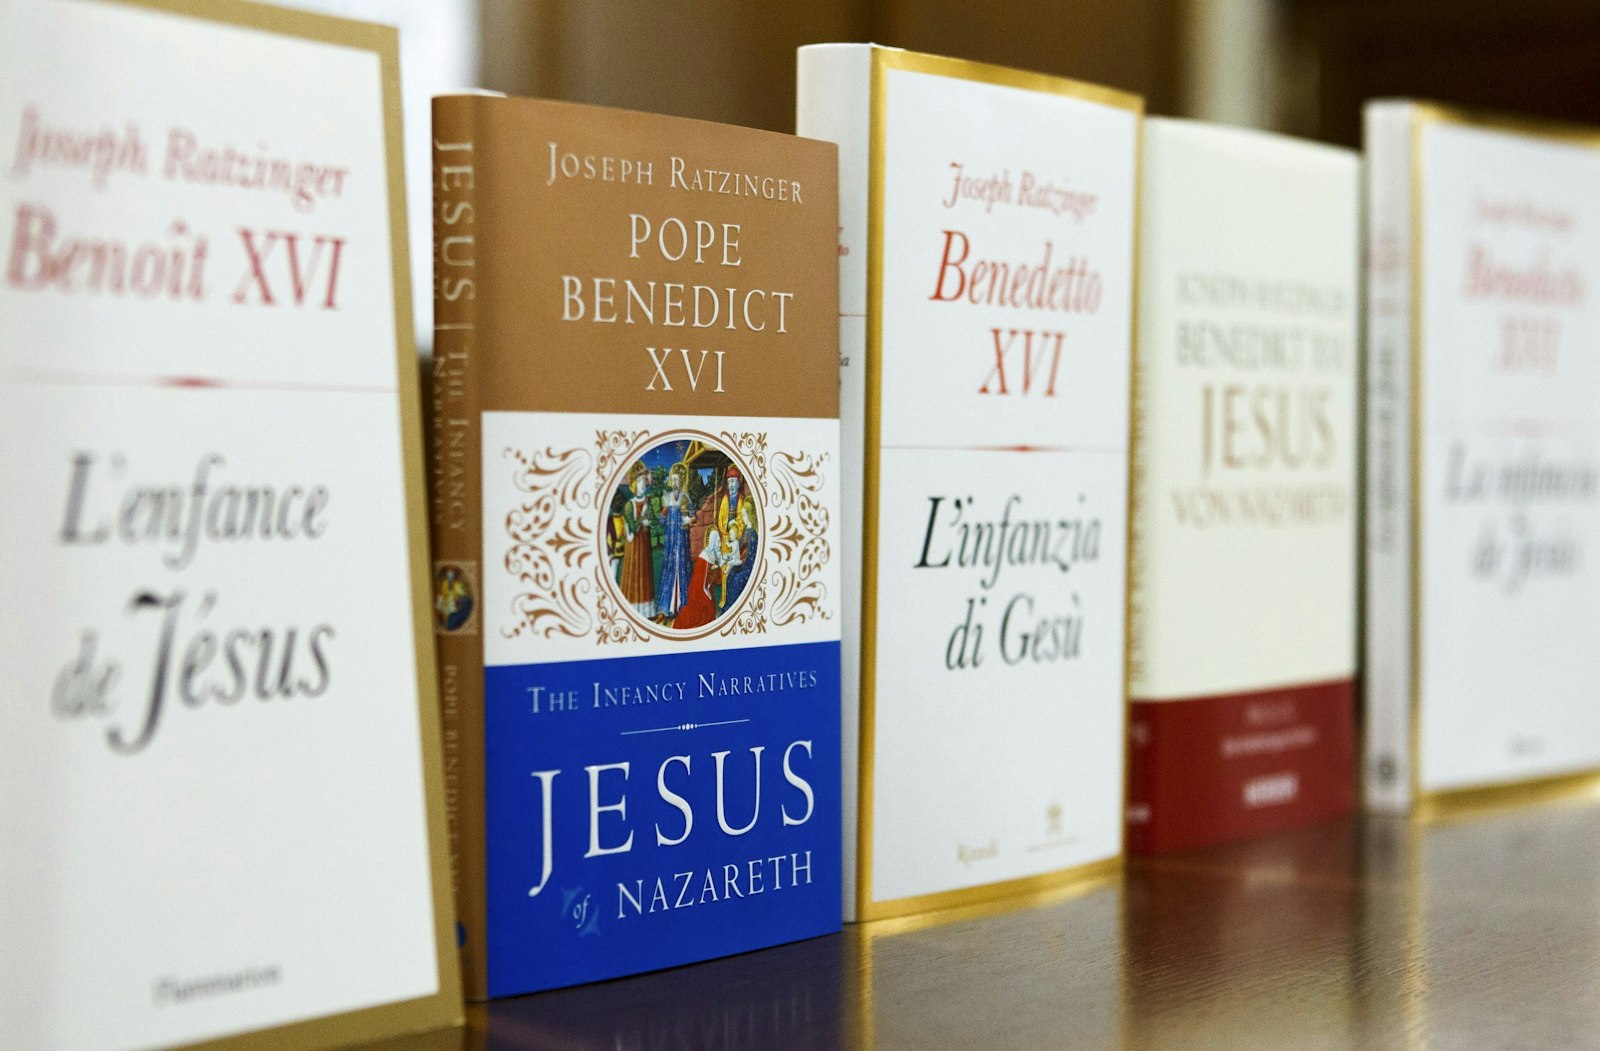 Pope Benedict XVI published three books in his "Jesus of Nazareth" series. Pictured are copies of the last in the series, "The Infancy of Jesus," displayed for the media in different languages at the Vatican in 2012. (CNS photo/Paul Haring)